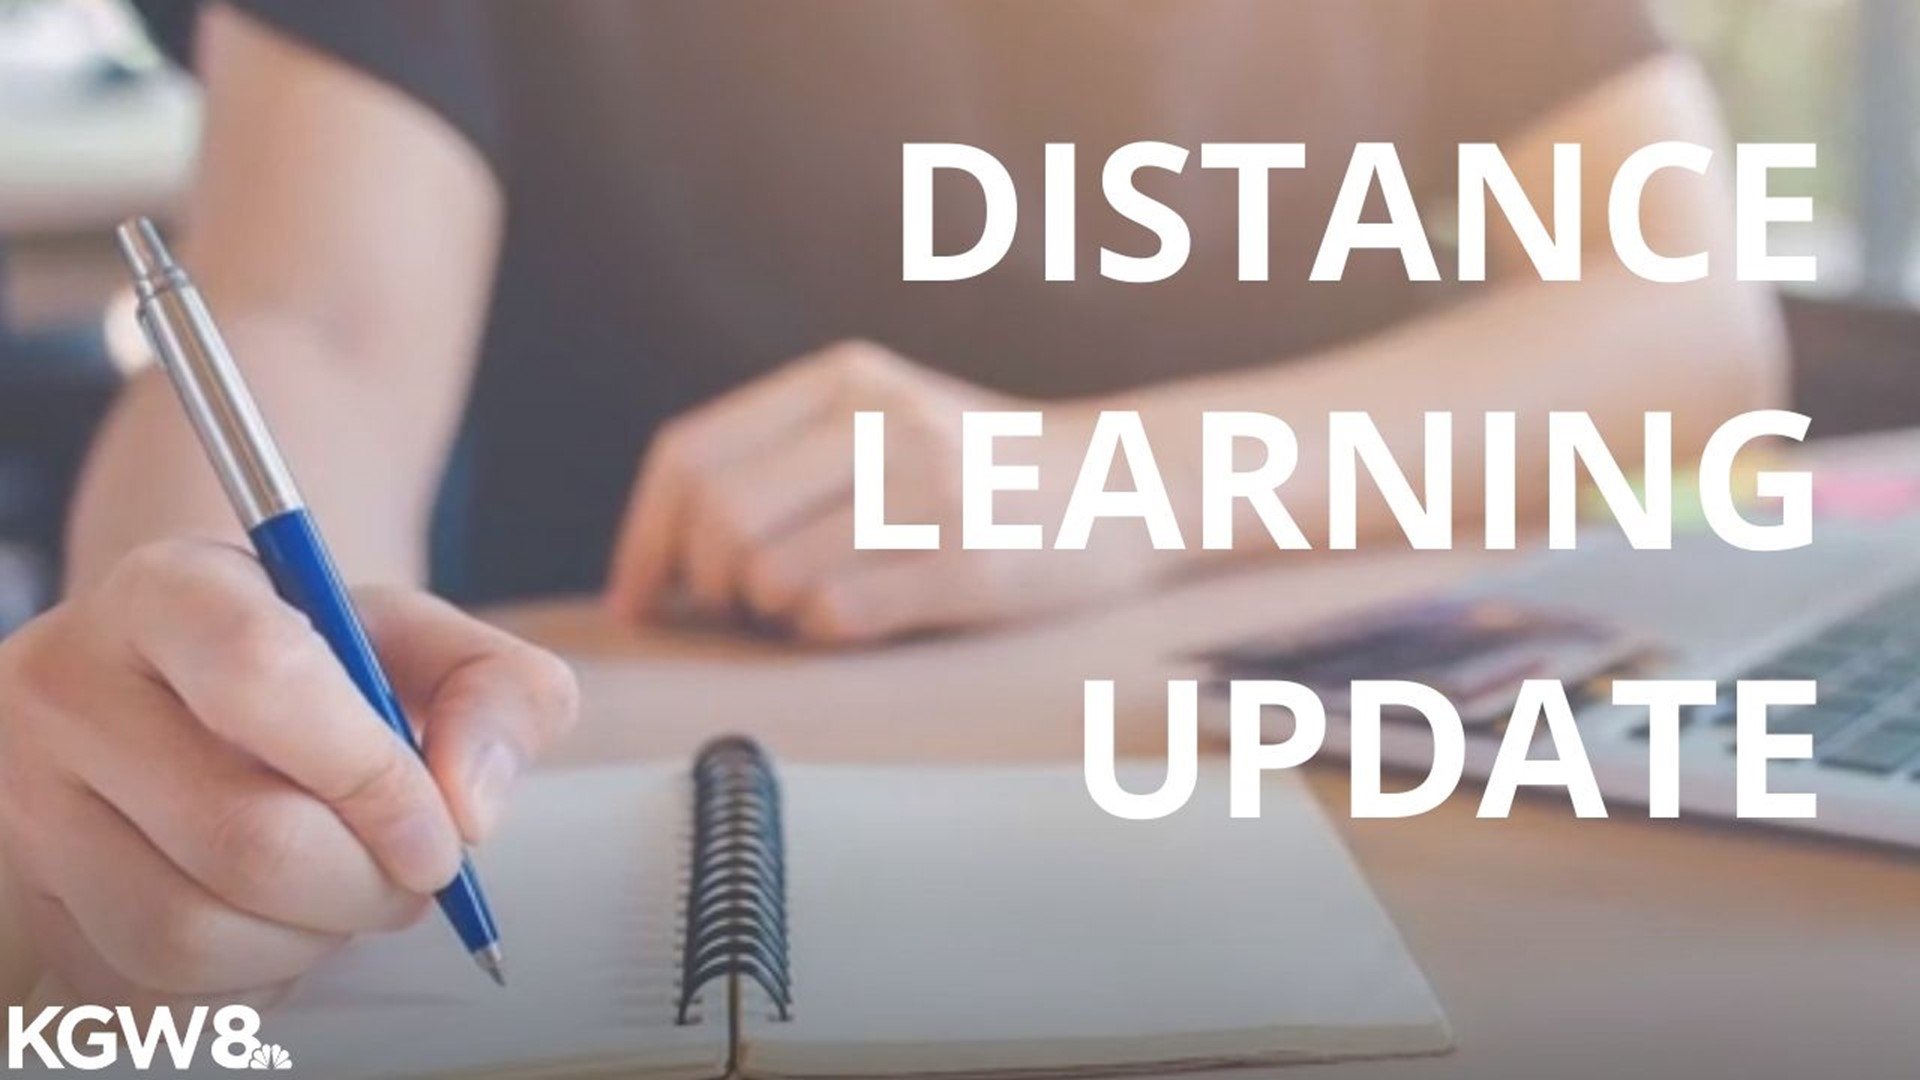 Oregon school districts are giving an update on distance learning.